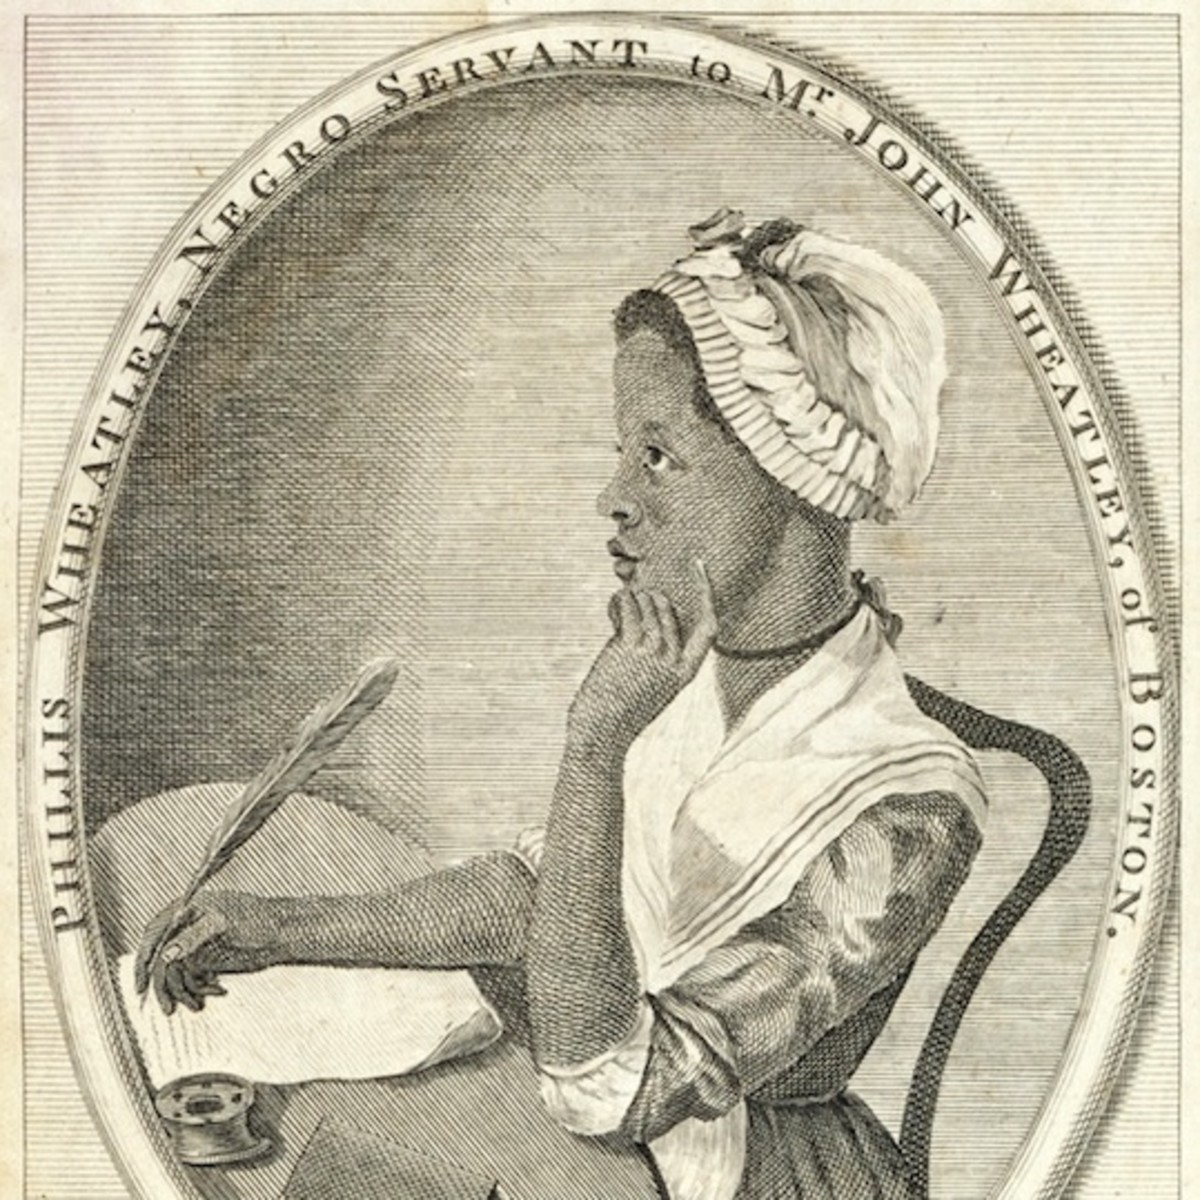 Portrait of Phillis Wheatley that appeared in her published work "Poems on Various Subjects, Religious and Moral"